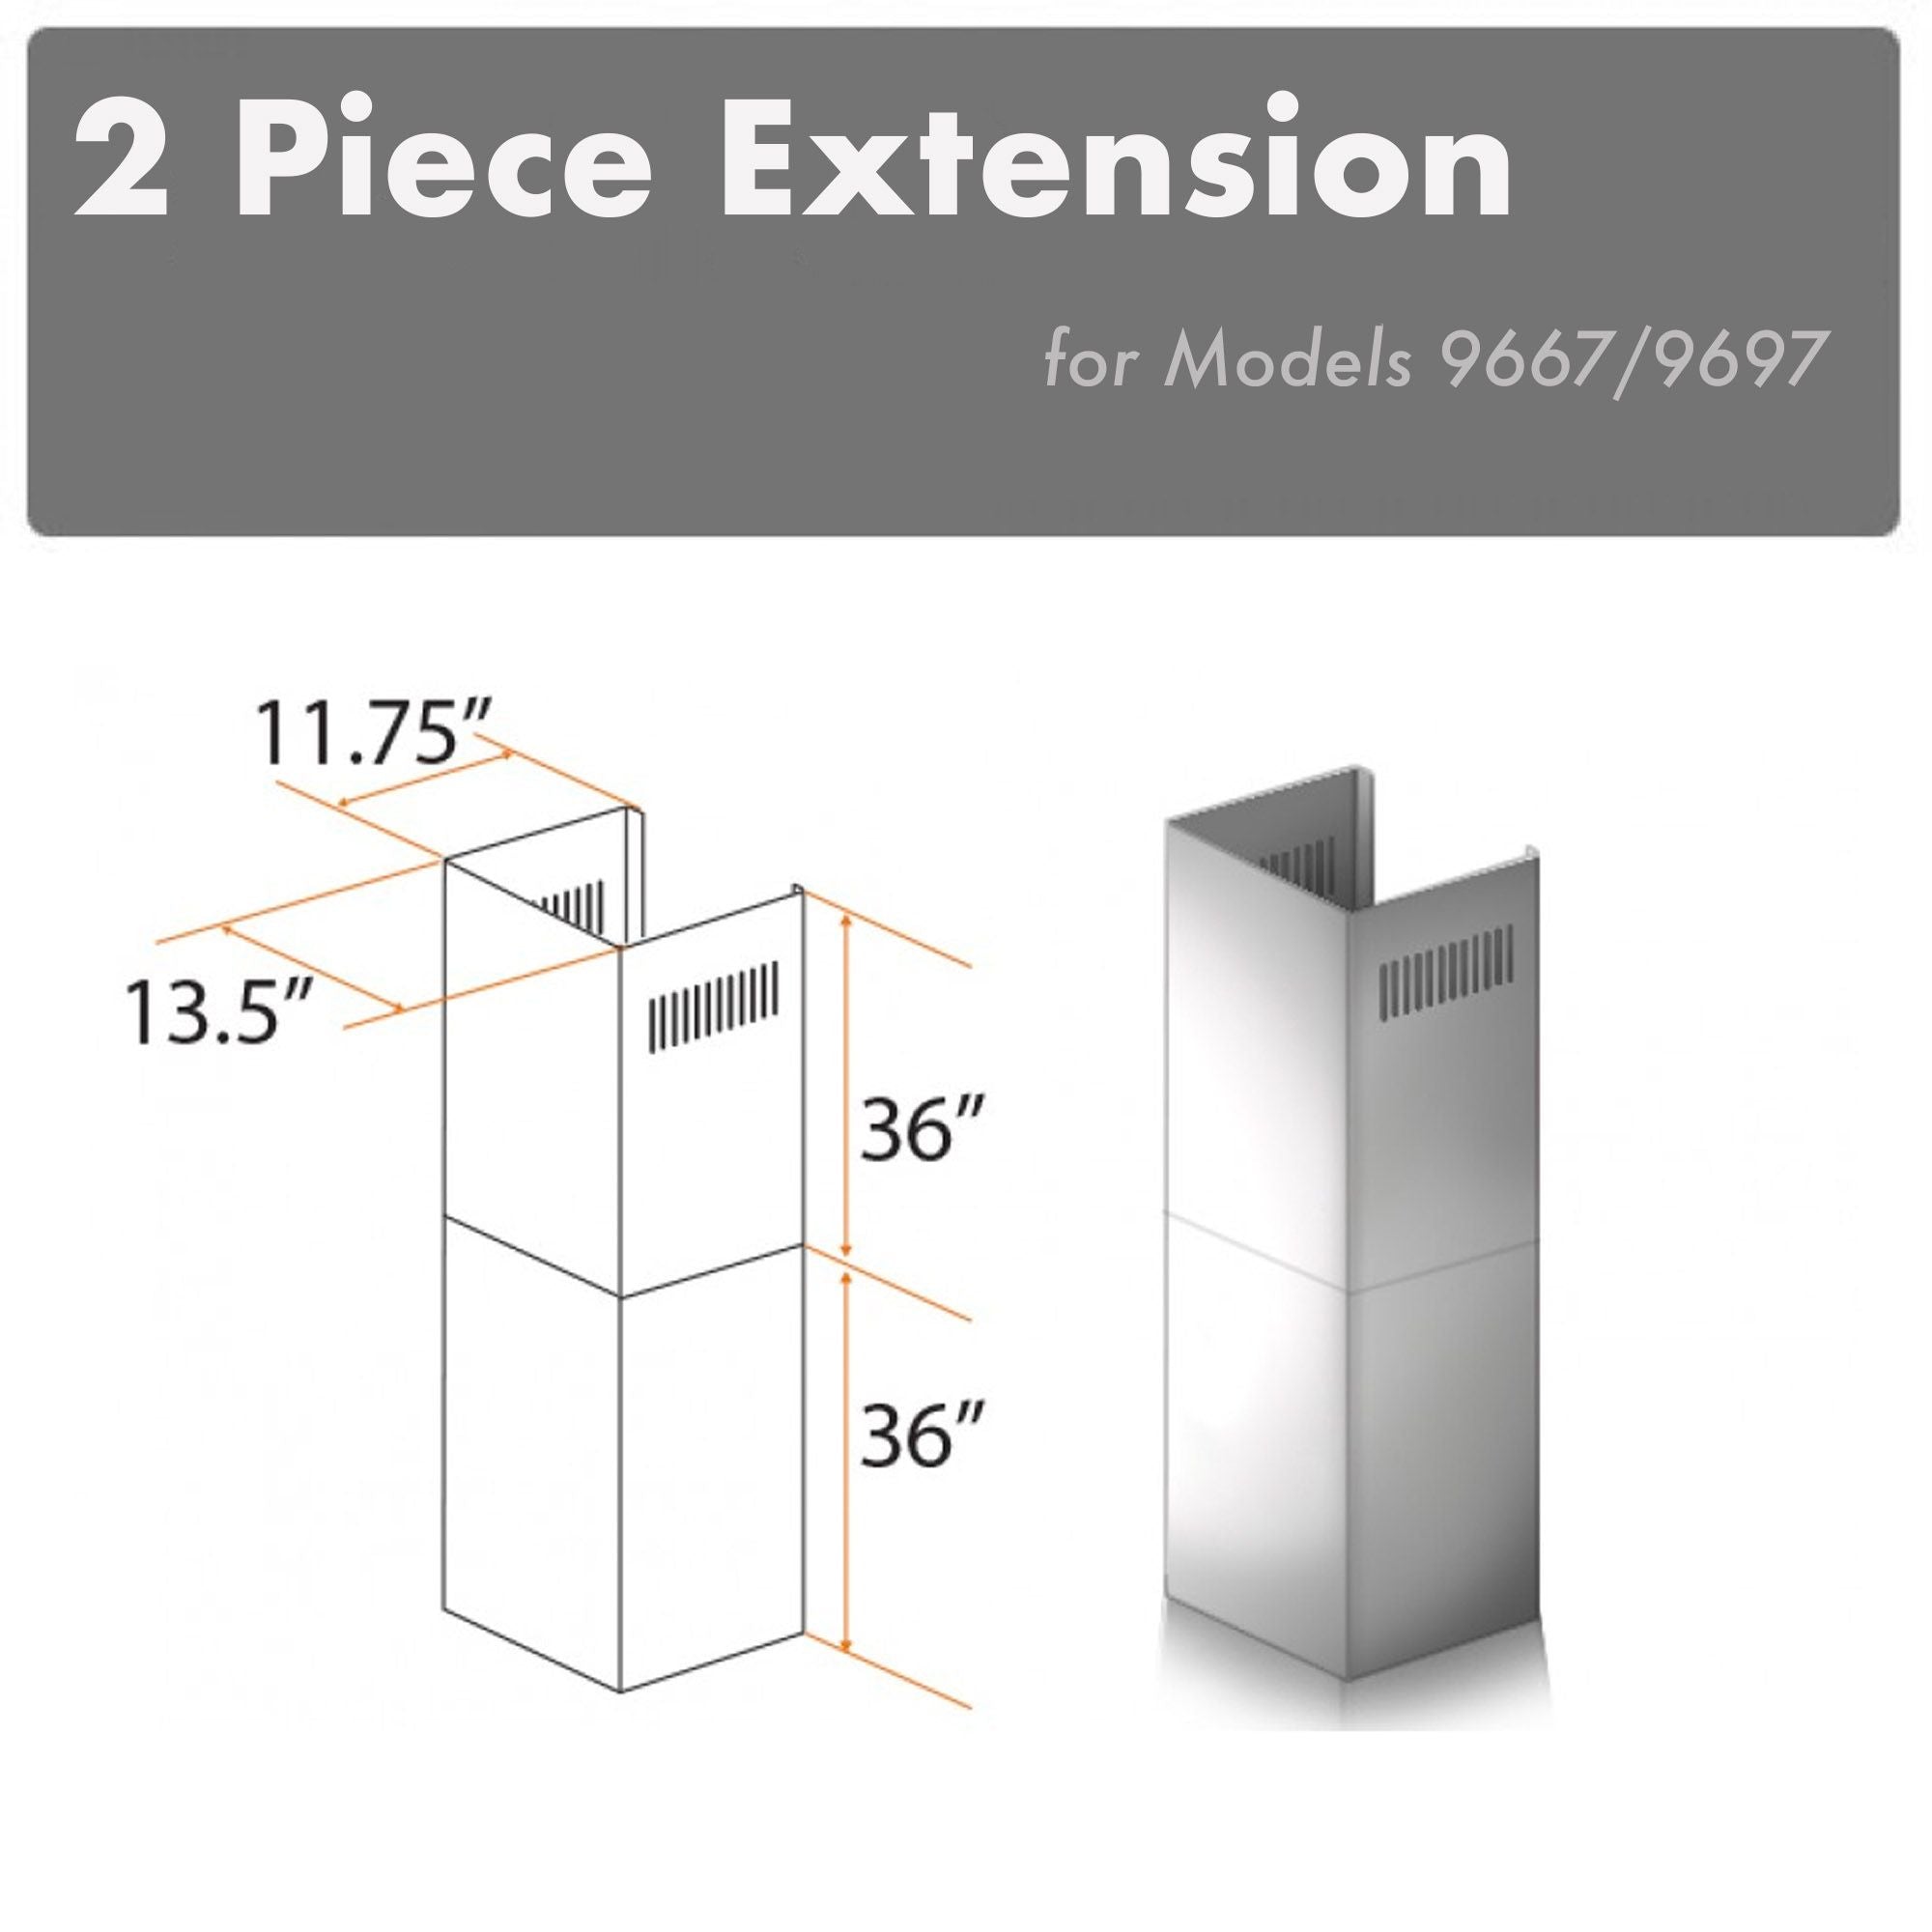 ZLINE 2-36 in. Chimney Extensions for 10 ft. to 12 ft. Ceilings (2PCEXT-9667/9697)